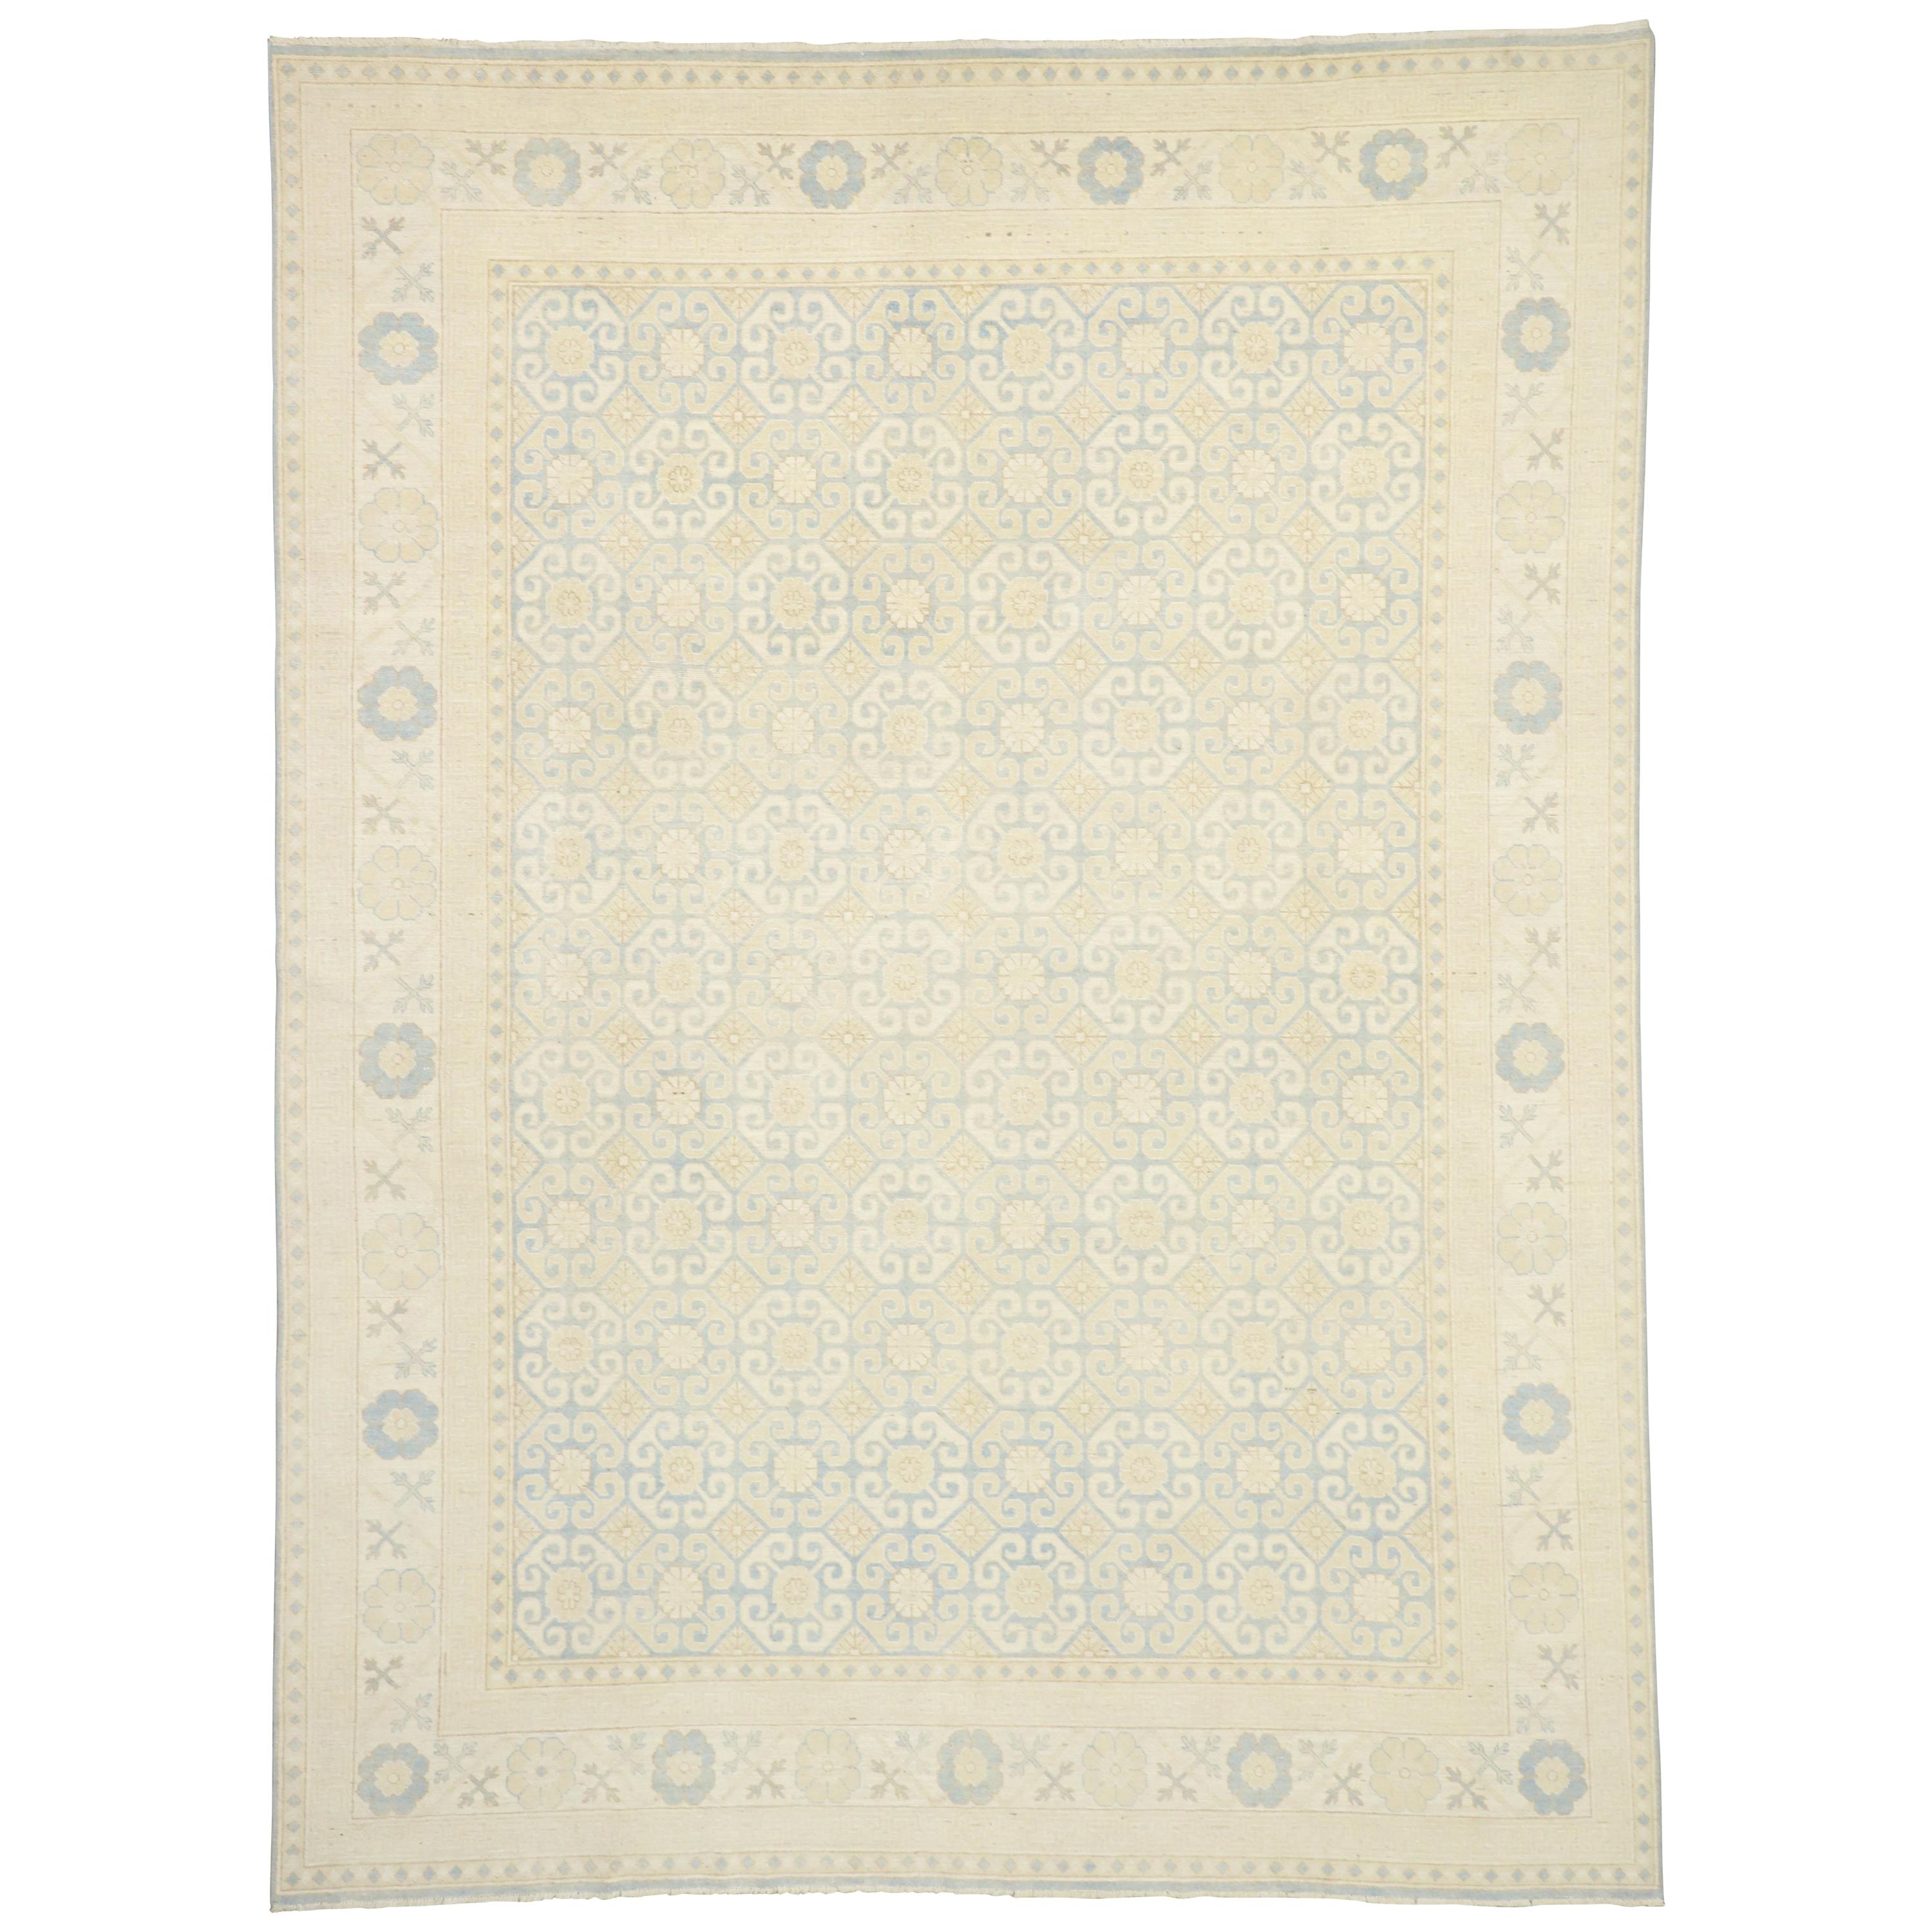 New Transitional Khotan Area Rug with Hamptons Chic Style, Cozy Cottage Vibes